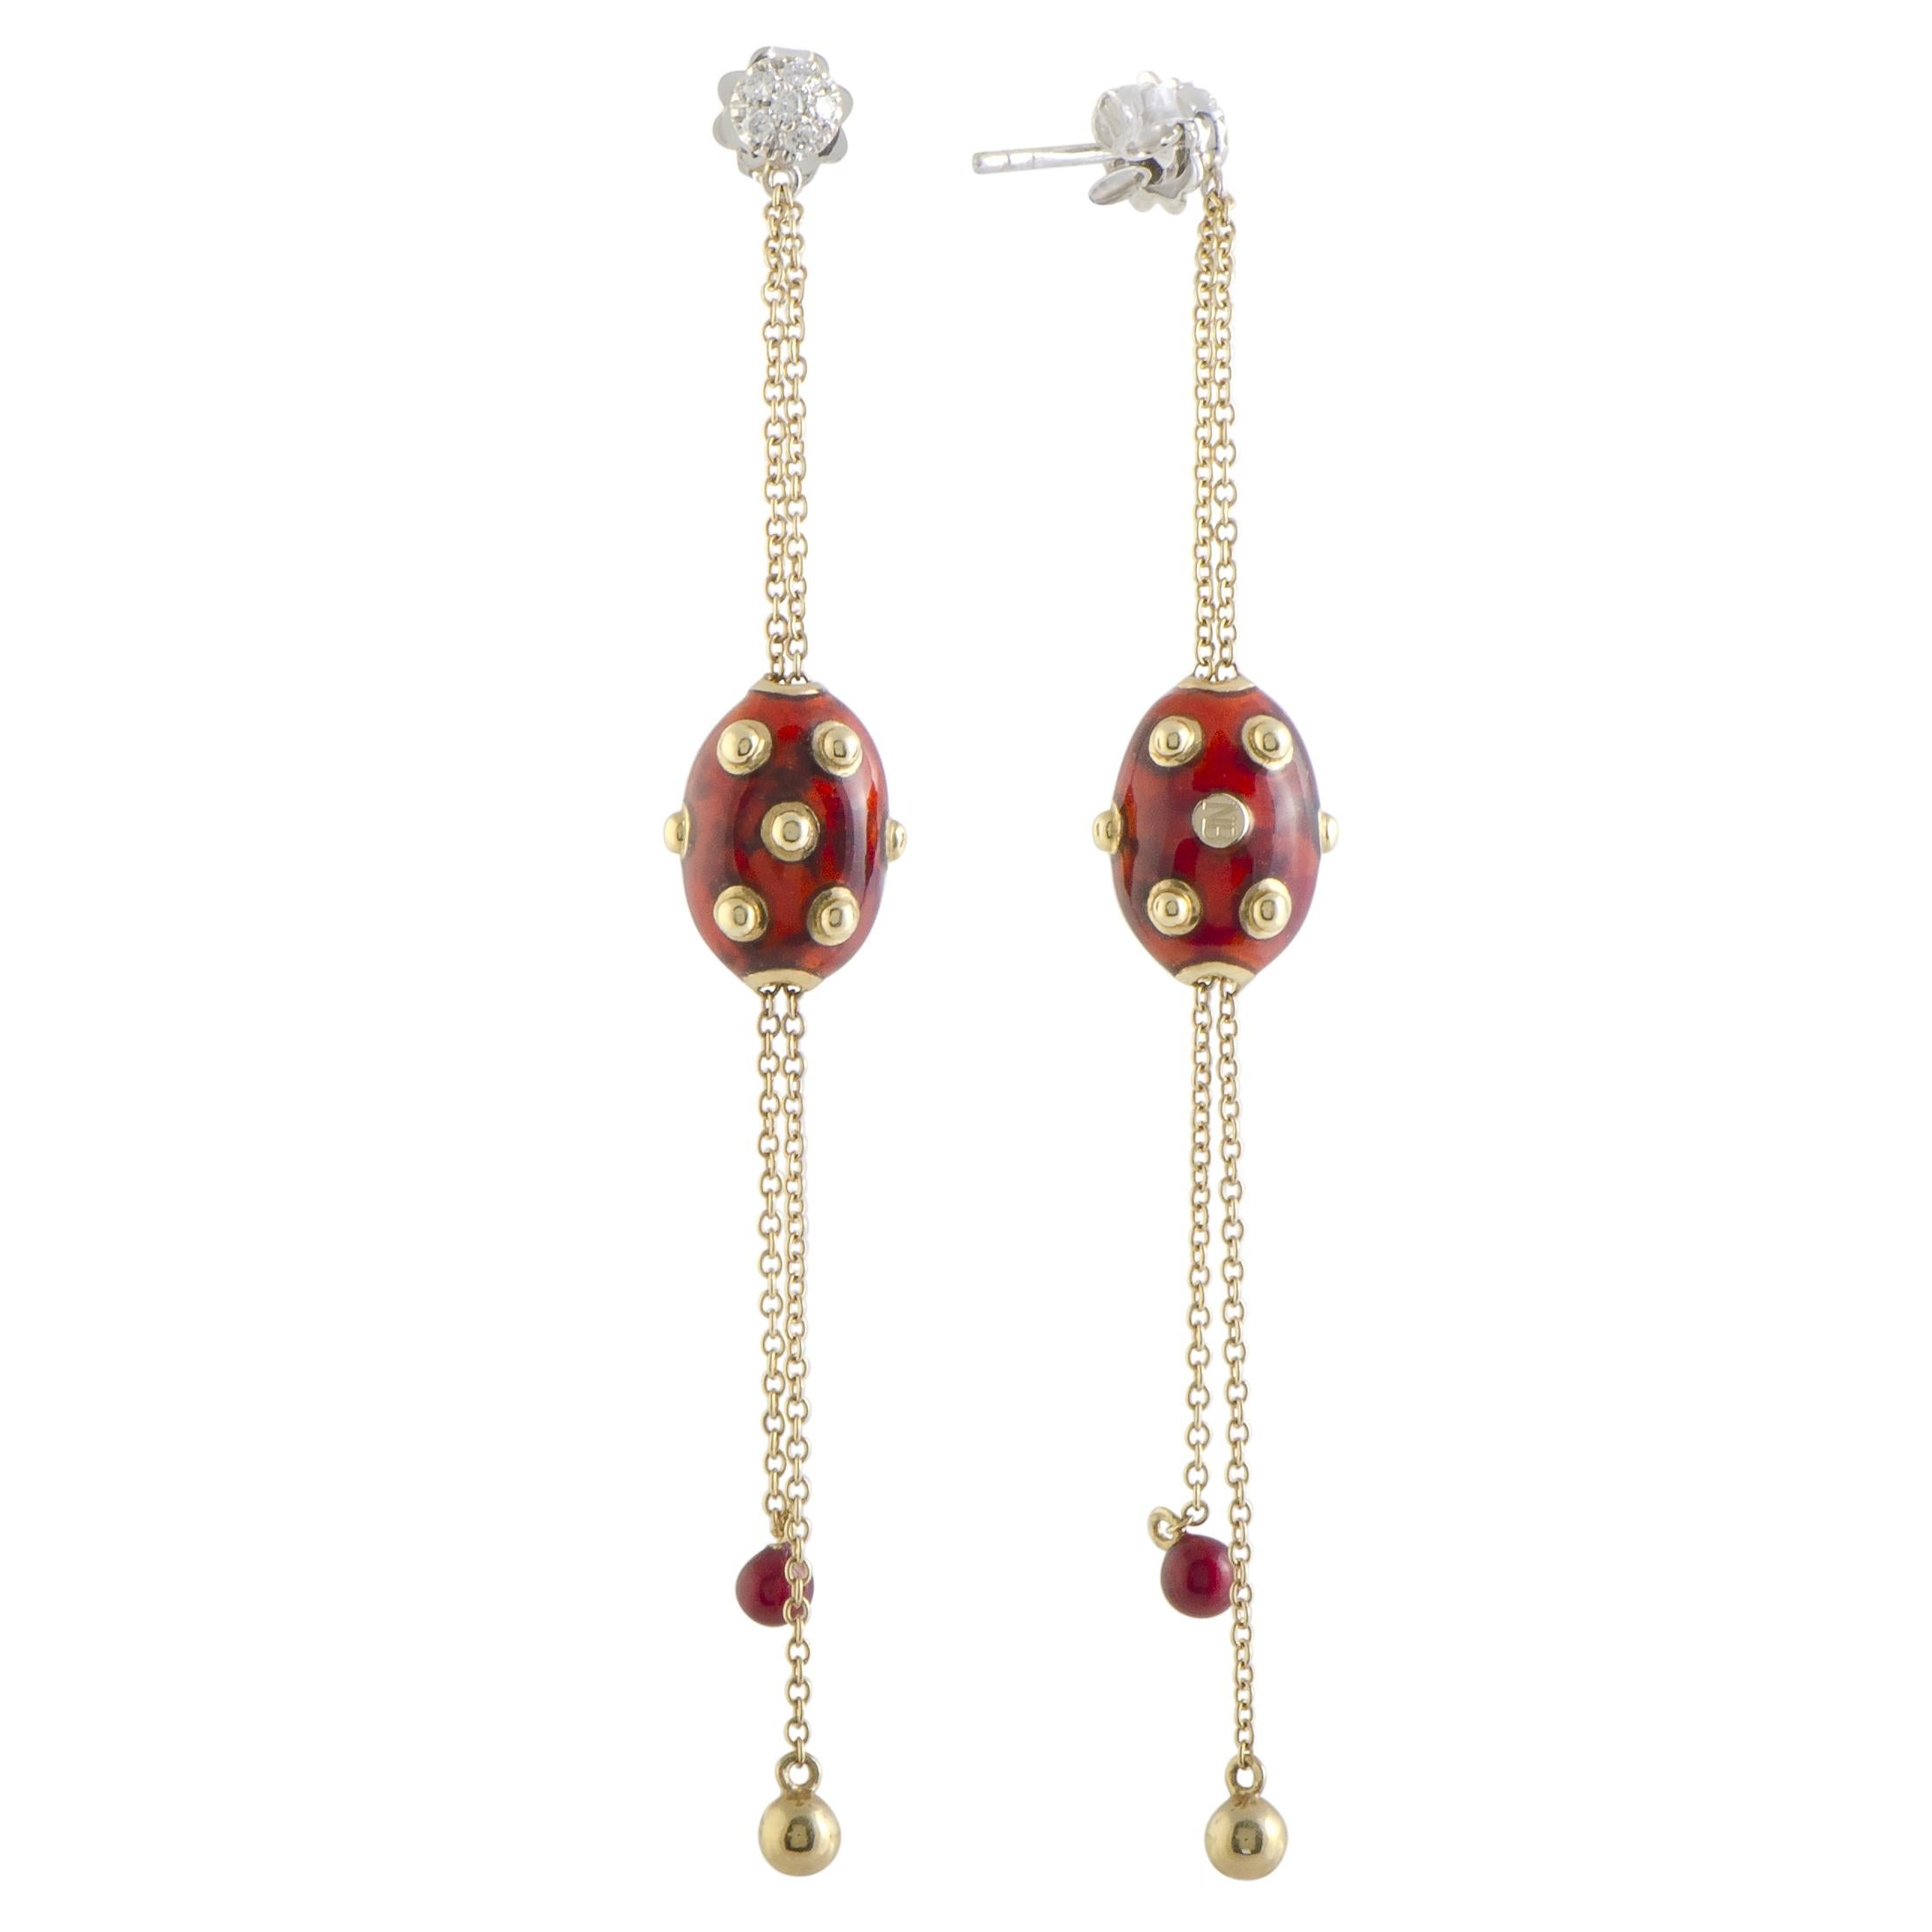 The fascinatingly striking enamel and the stunningly radiant yellow gold produce an incredibly captivating effect in this magnificent pair of earrings that is wonderfully designed by Nouvelle Bague. The earrings are exquisitely crafted from an